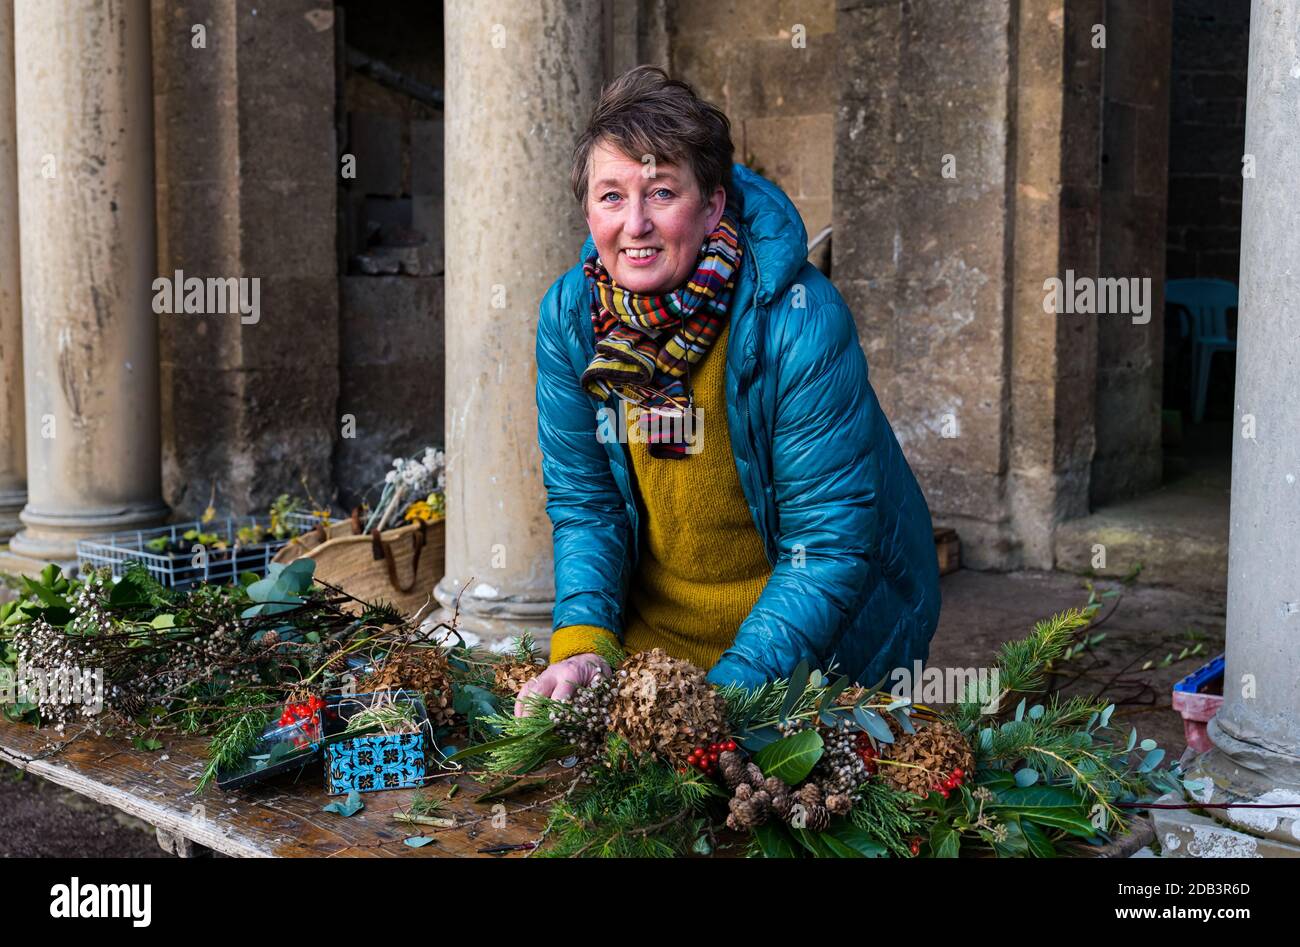 Haddington, East Lothian, Scotland, UK, Flowersmith prepares for Christmas:  Ruth Alder, a flowersmith, weaves willow into wreaths to decorate for Christmas using foliage and flowers from Amisfield Walled Garden where she is a volunteer. Amisfield Walled garden is an 18th century garden managed by the Amisfield Preservation Trust and is free to visit all year round. Pictured: Ruth attaches flowers and foliage gathered from the walled garden Stock Photo